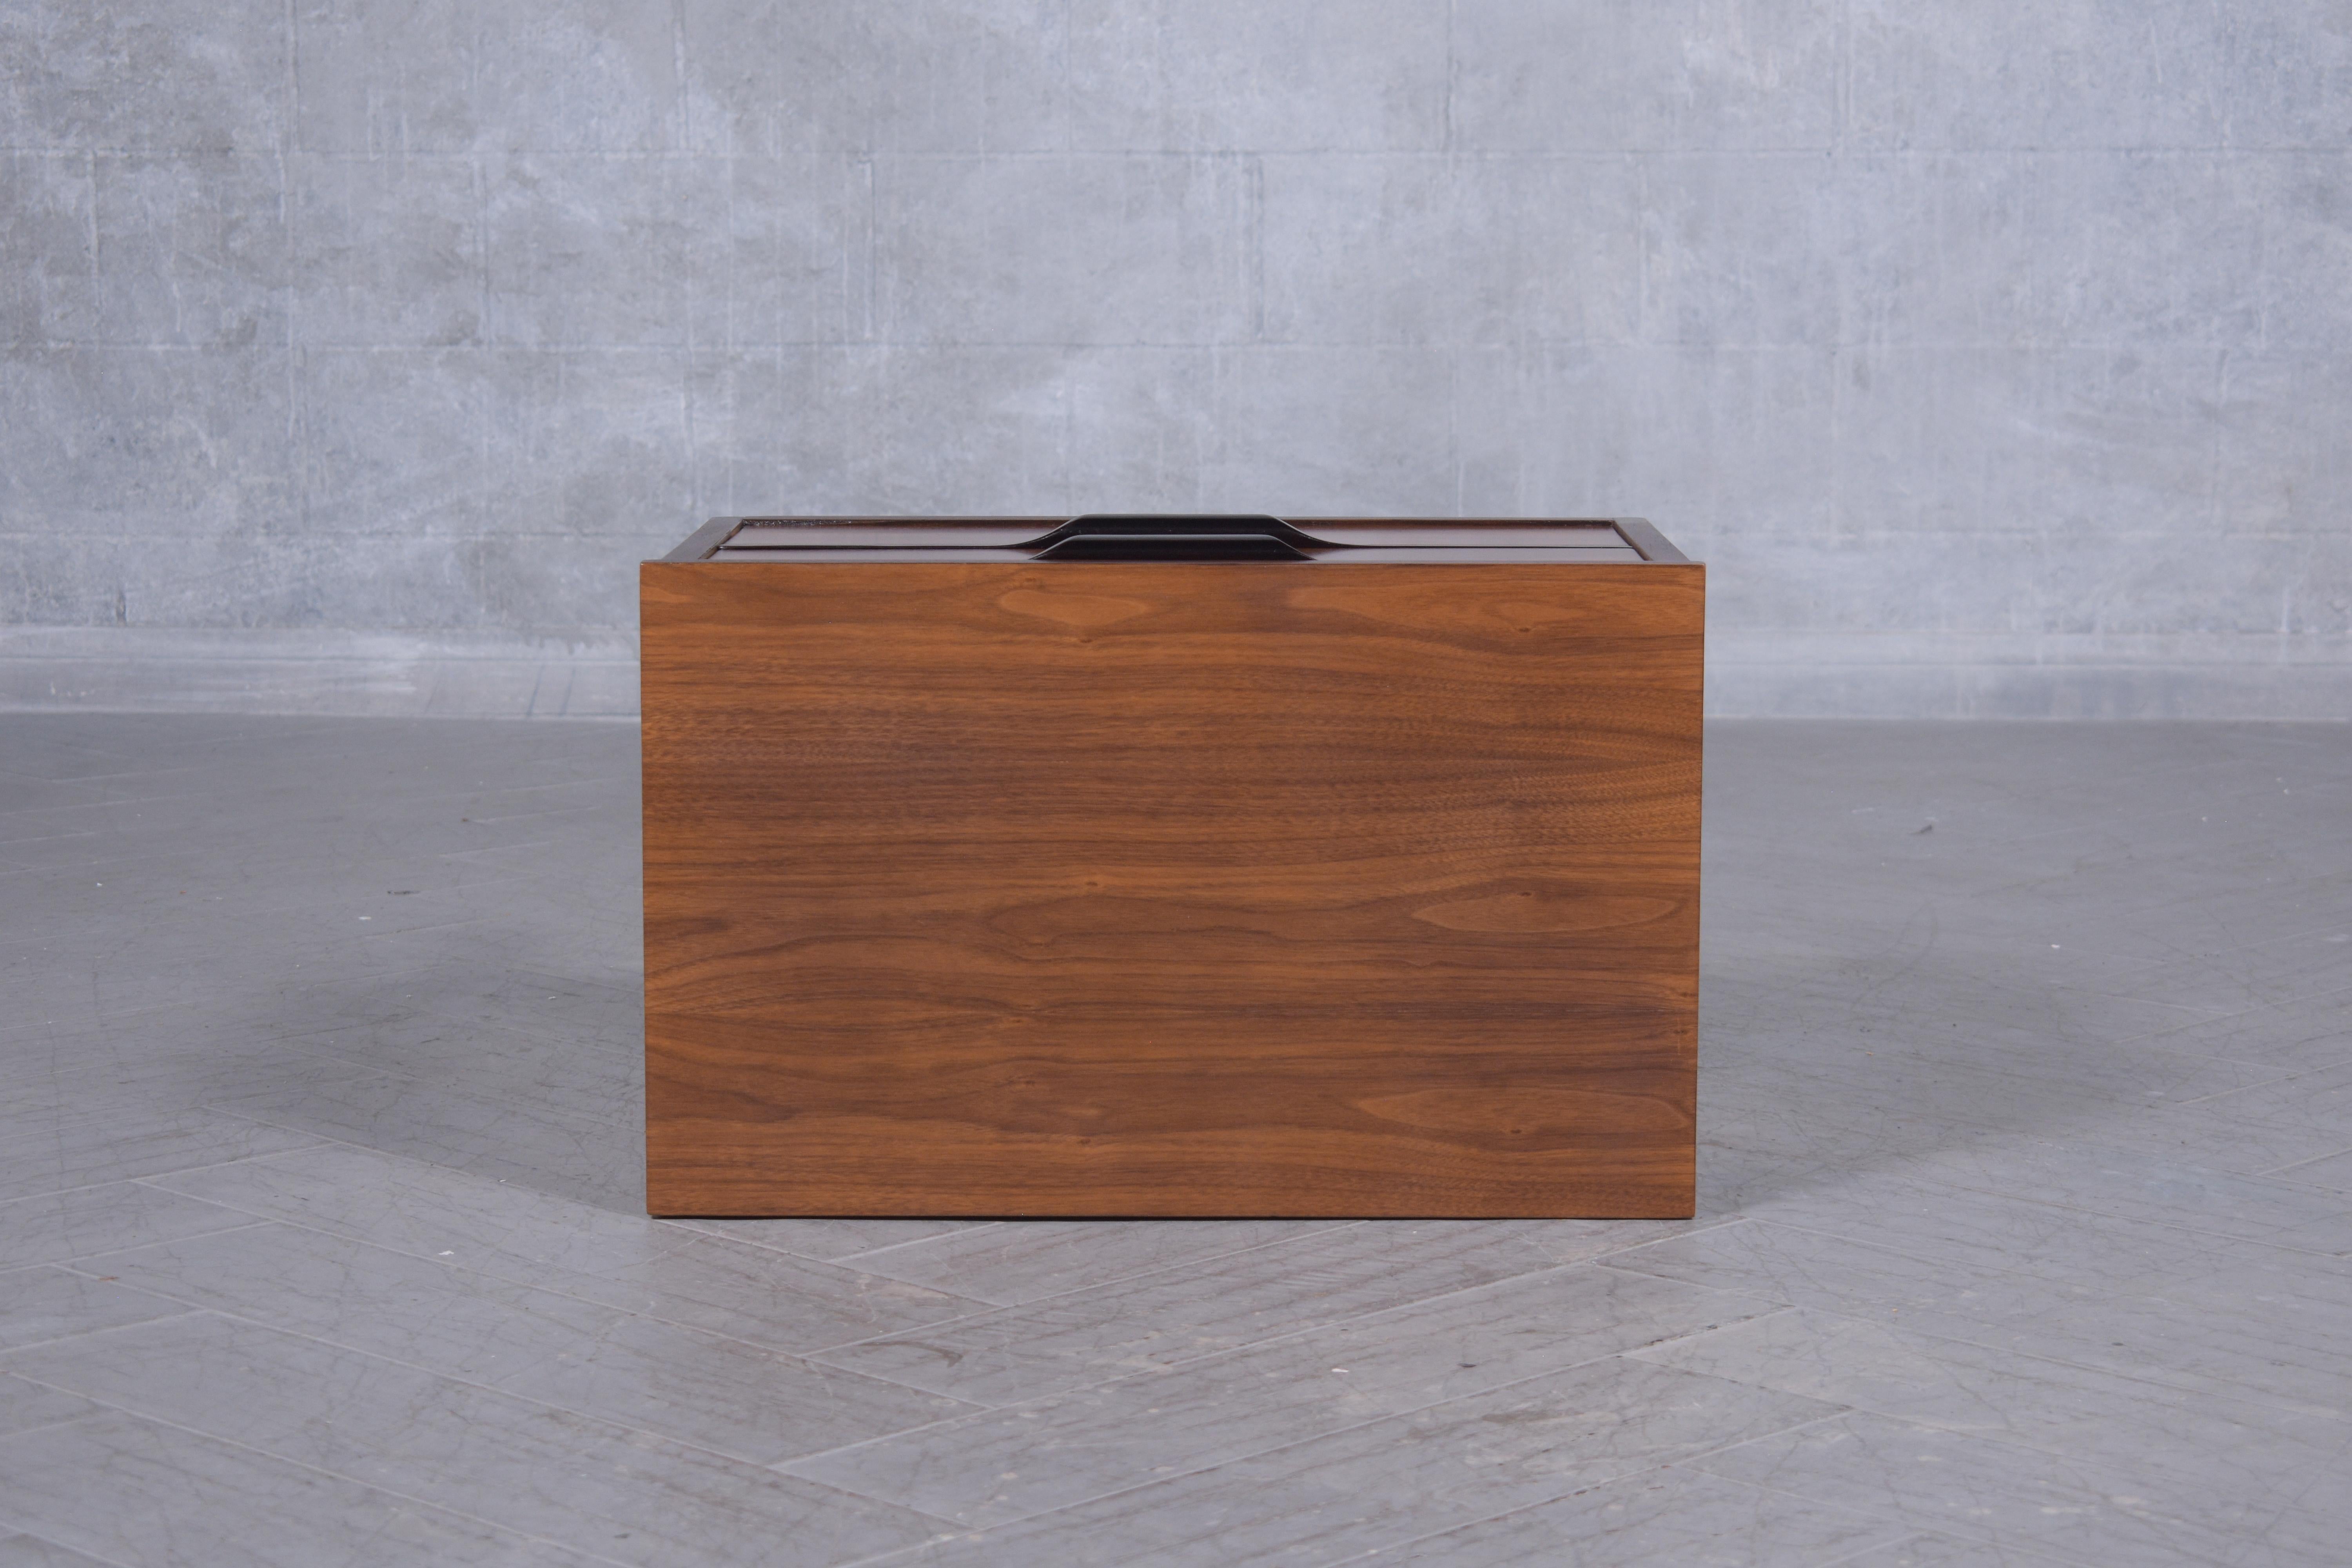 1960s Mid-Century Modern Walnut Nightstand: Ebonized Finish with Carved Details For Sale 6